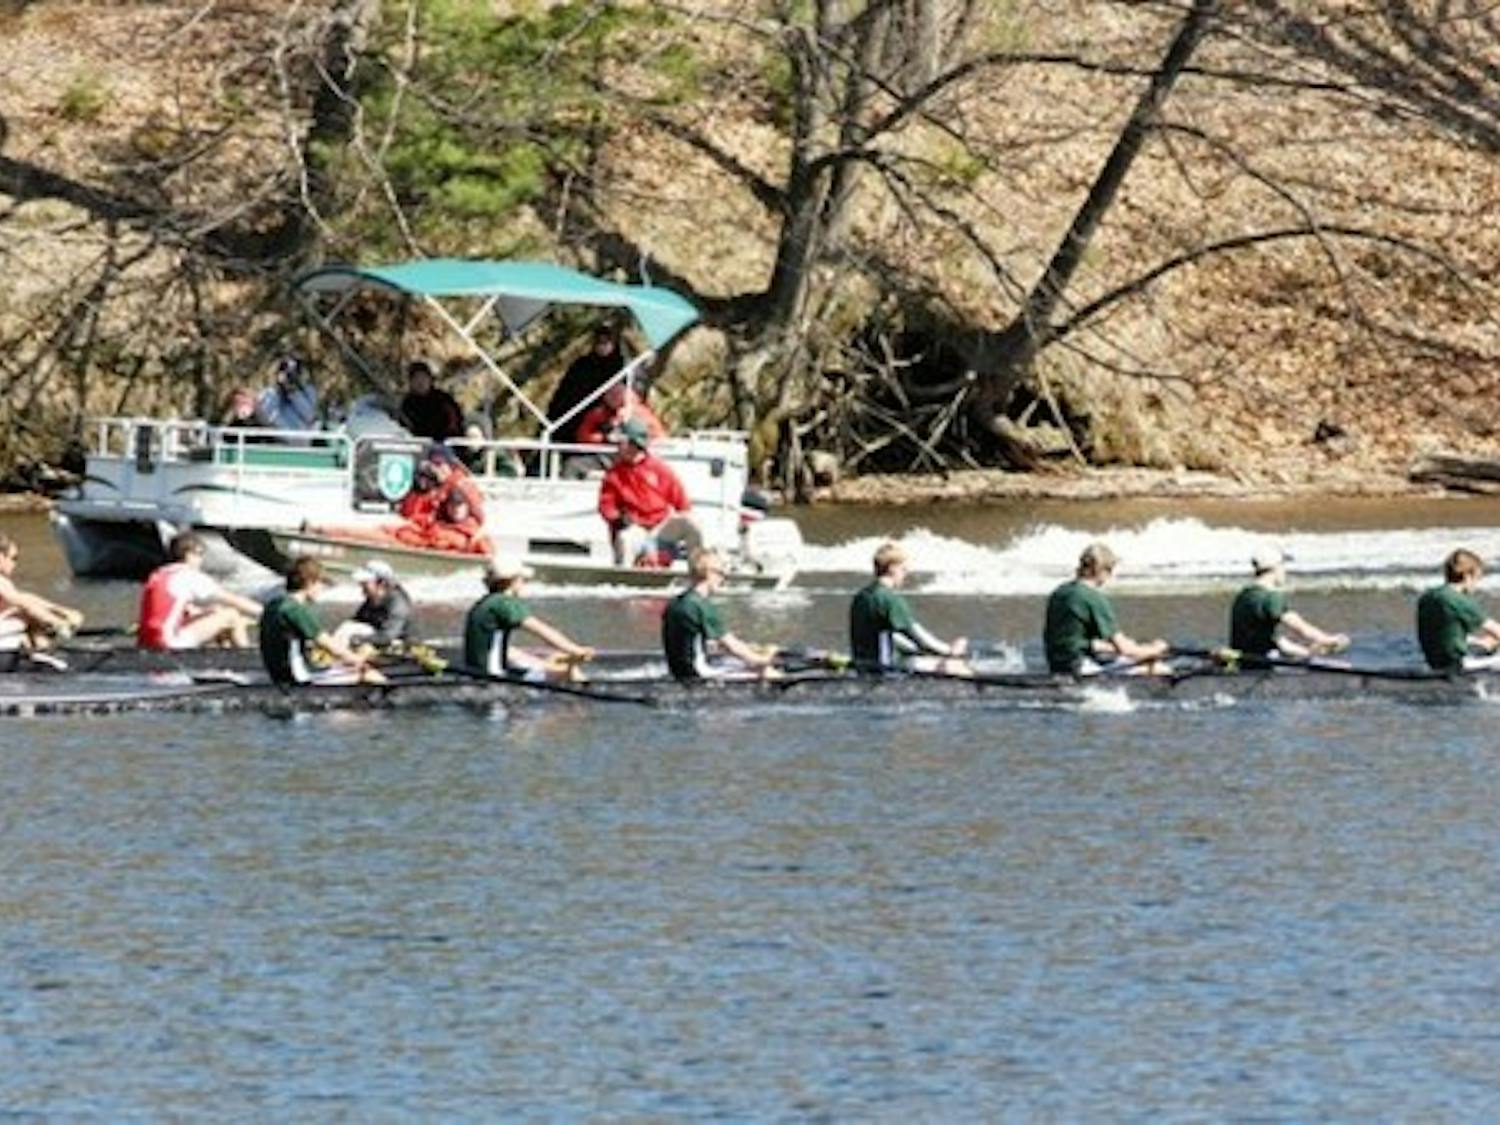 After the Big Green first varsity beat Cornell for the Baggaley Bowl, Cornell won the second and third varsity races.